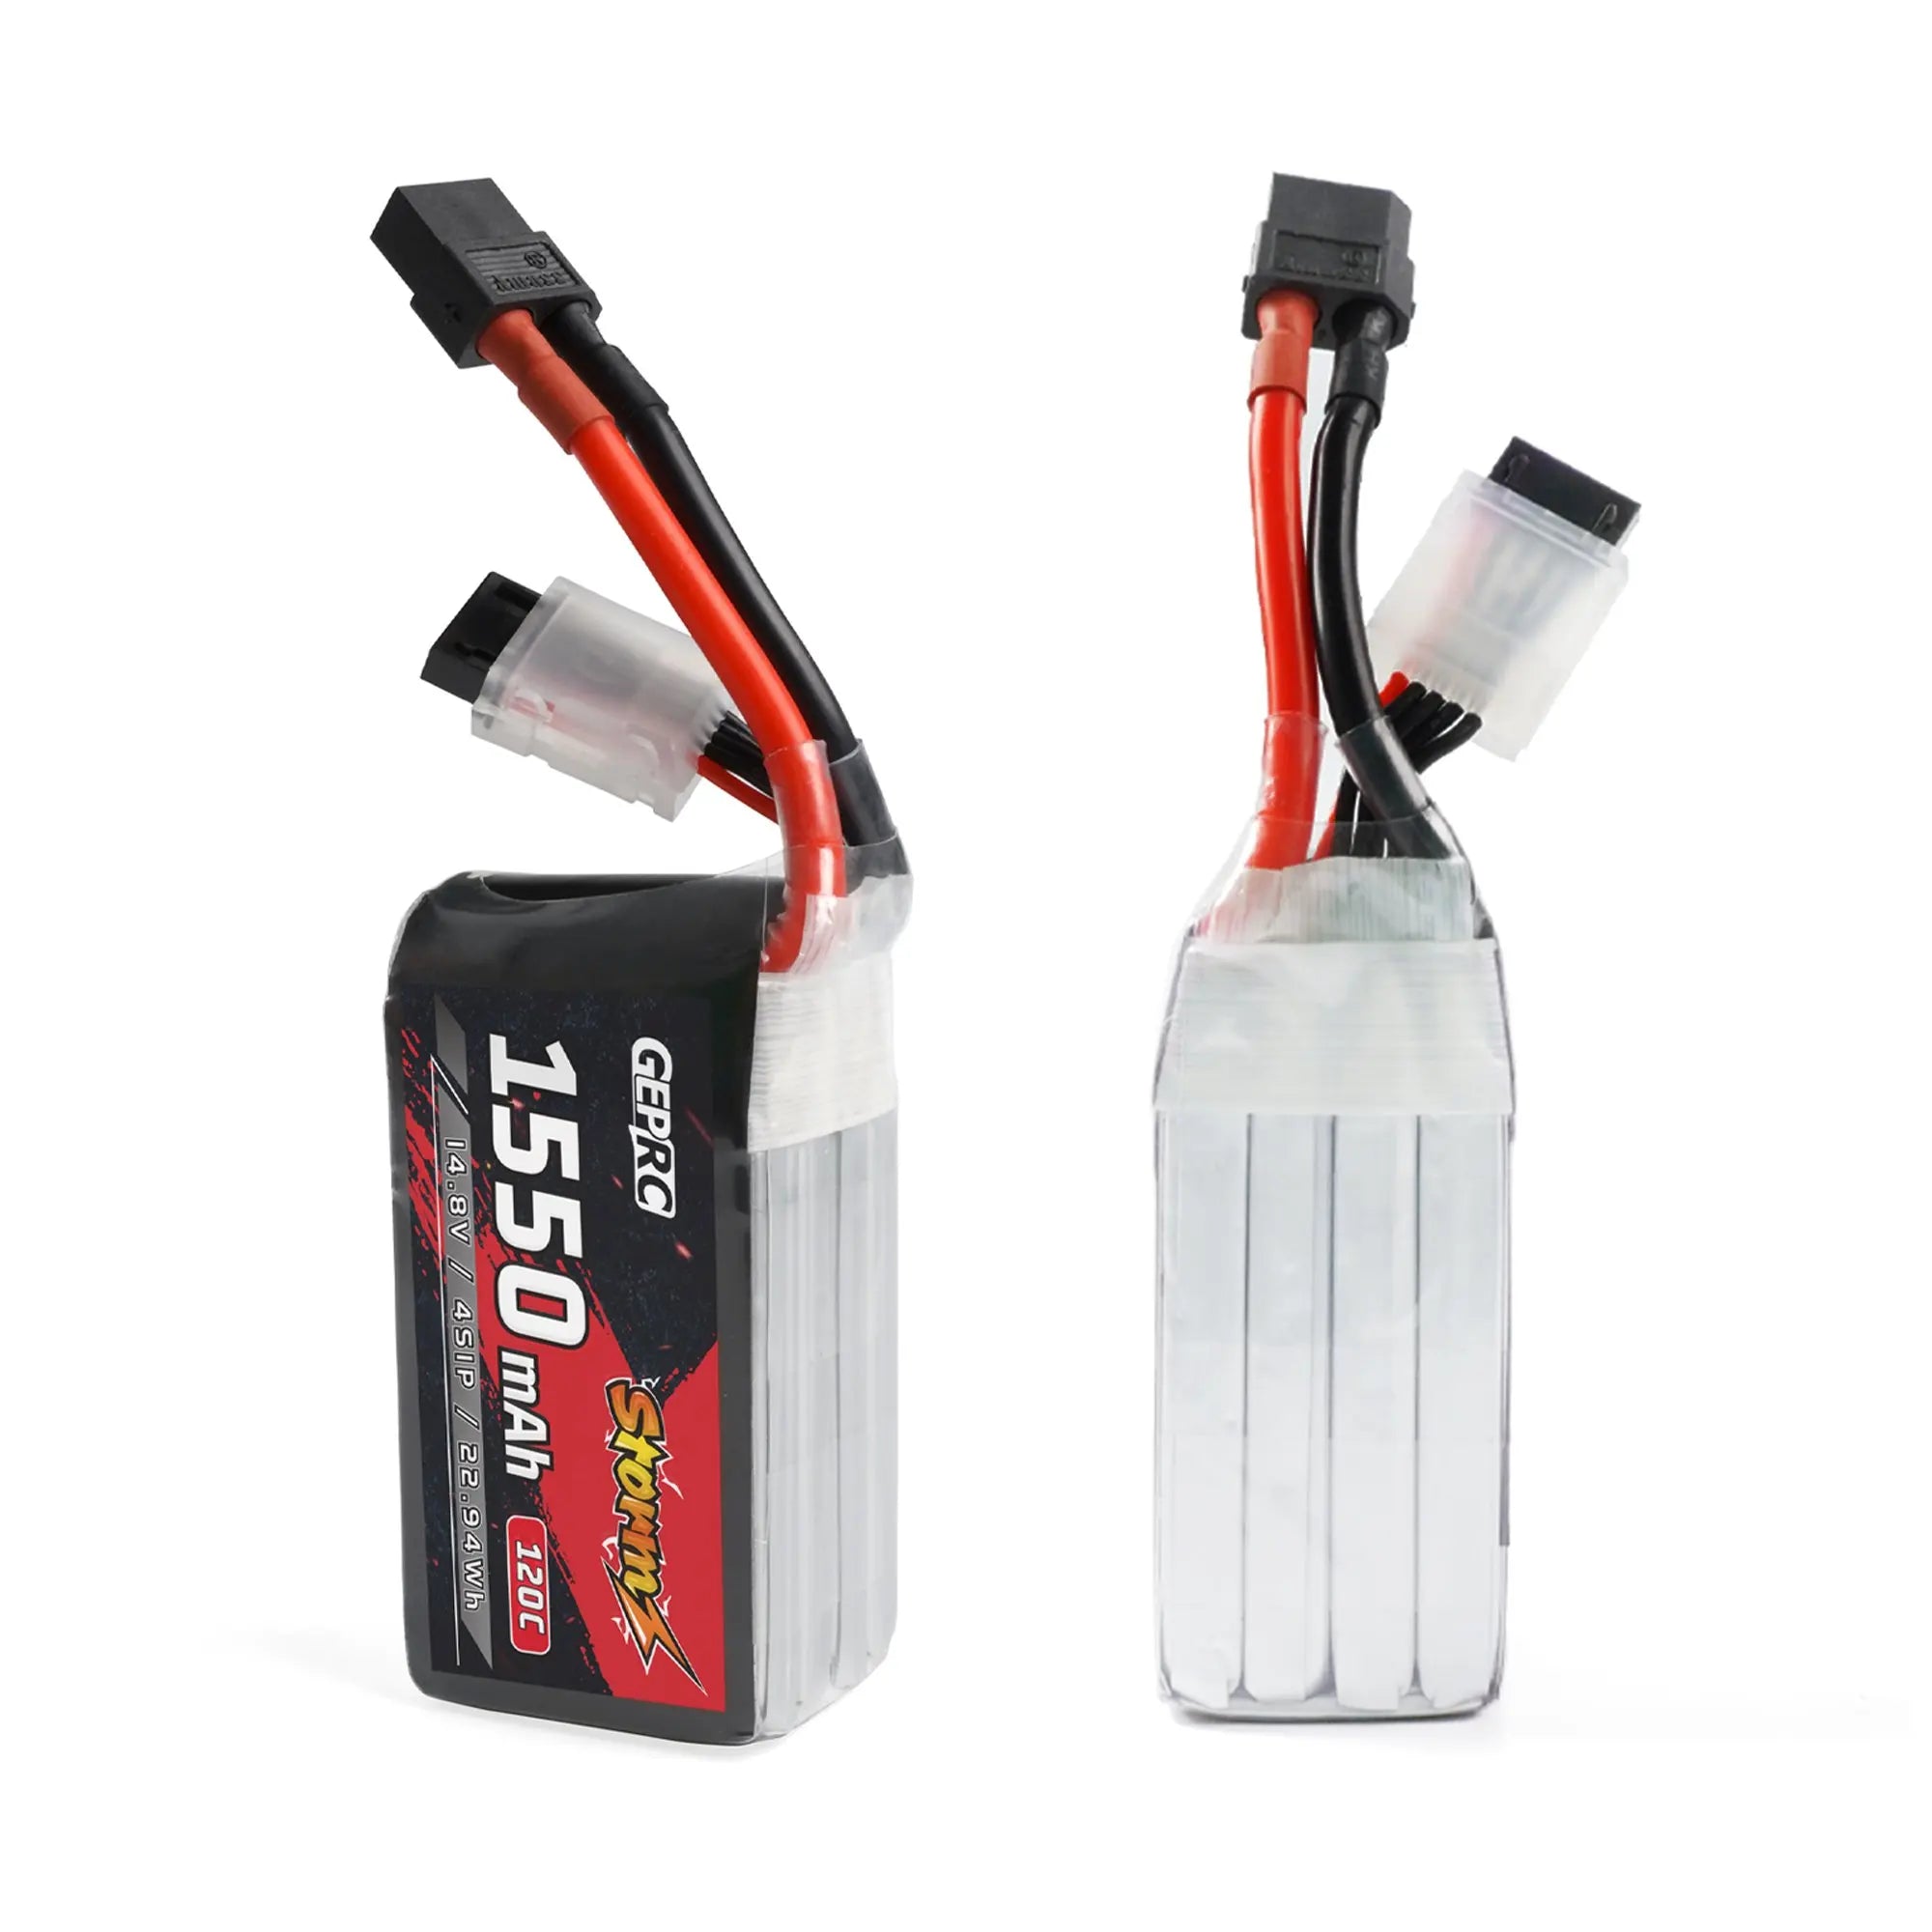 GEPRC Storm 4S 1550mAh 120C Lipo Battery, A: It is recommended to use the HOTA D6 PRO charger, ISDT 608